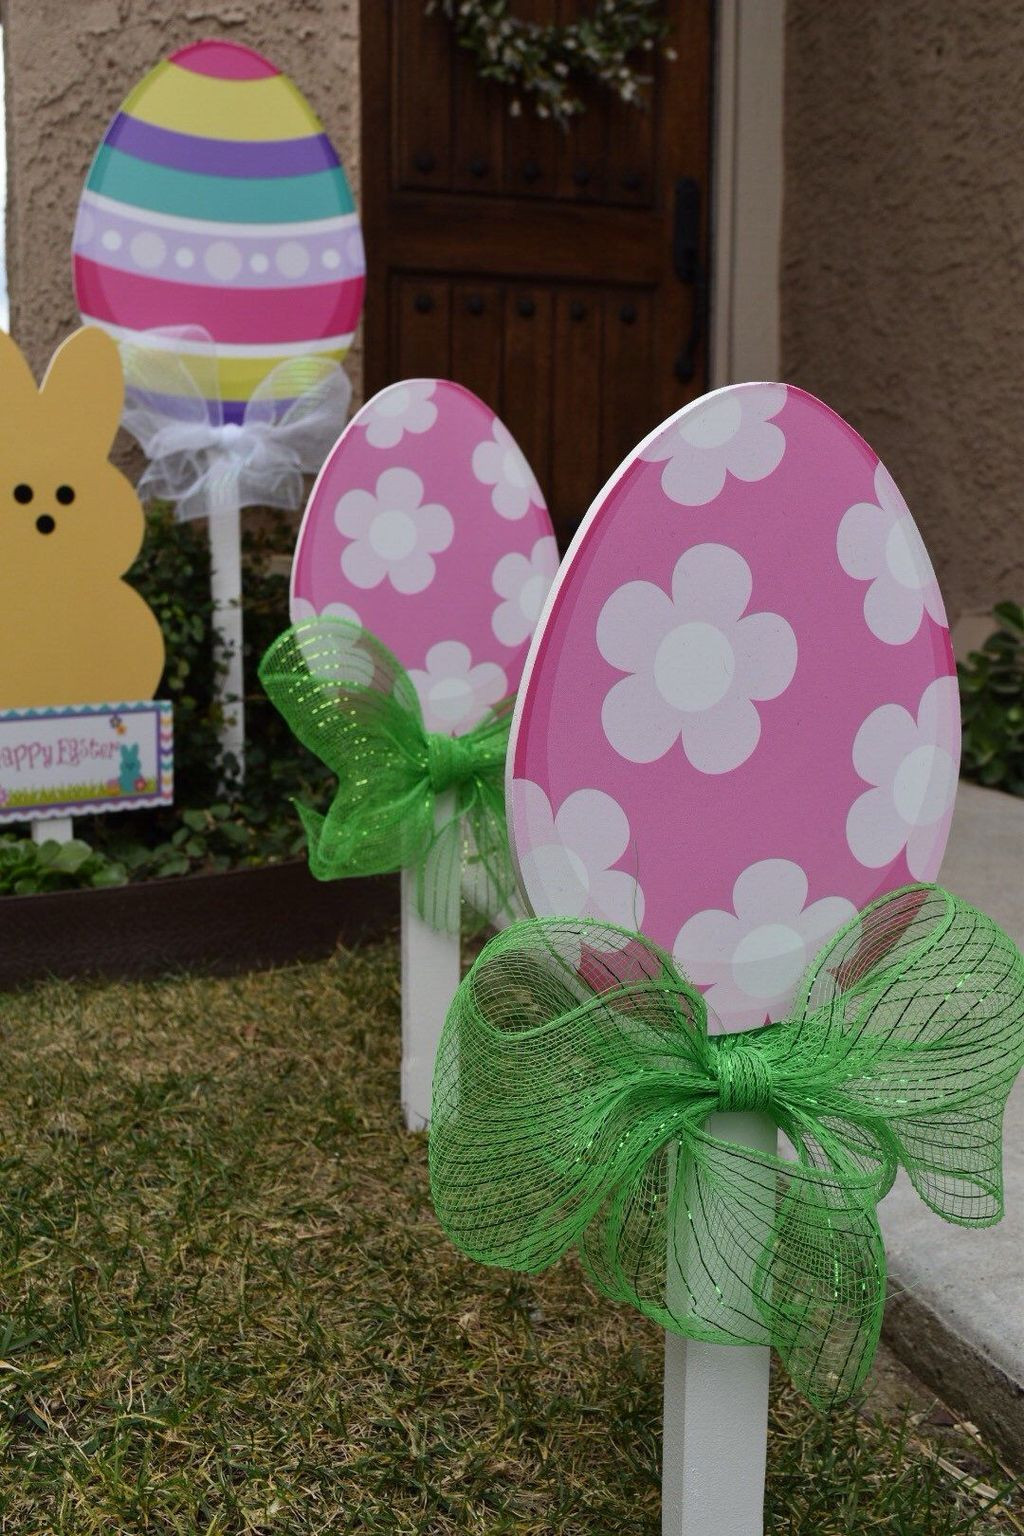 Diy Outdoor Easter Decorations
 36 Fascinating Outdoor Easter Decorations Ideas To Make